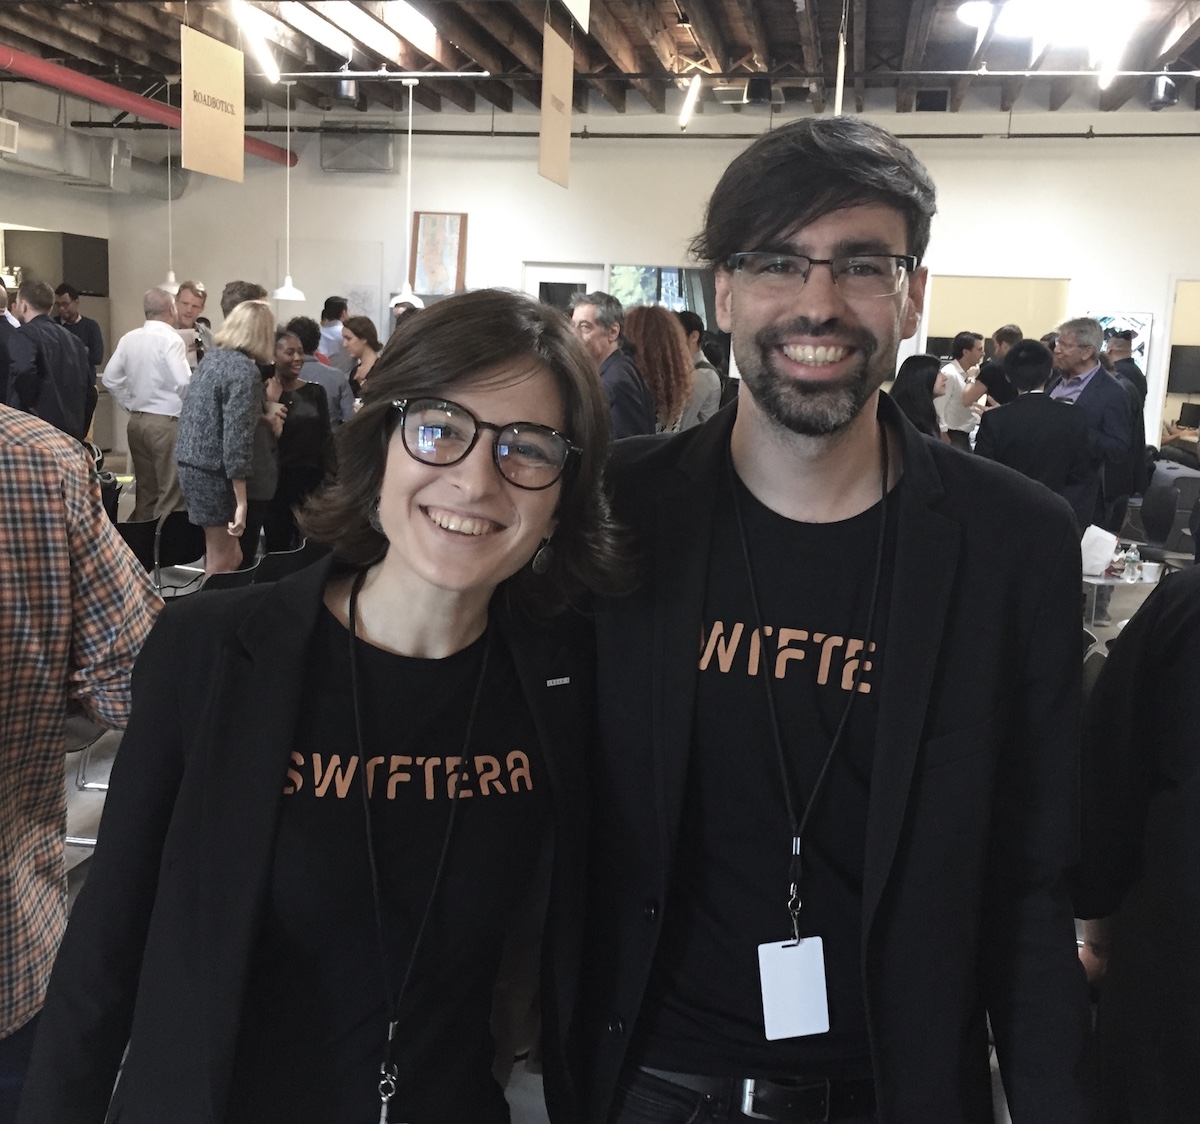 Swiftera founders Ignasi Lluch and Hripsime Matevosyan. (Photo by Tyler Woods)